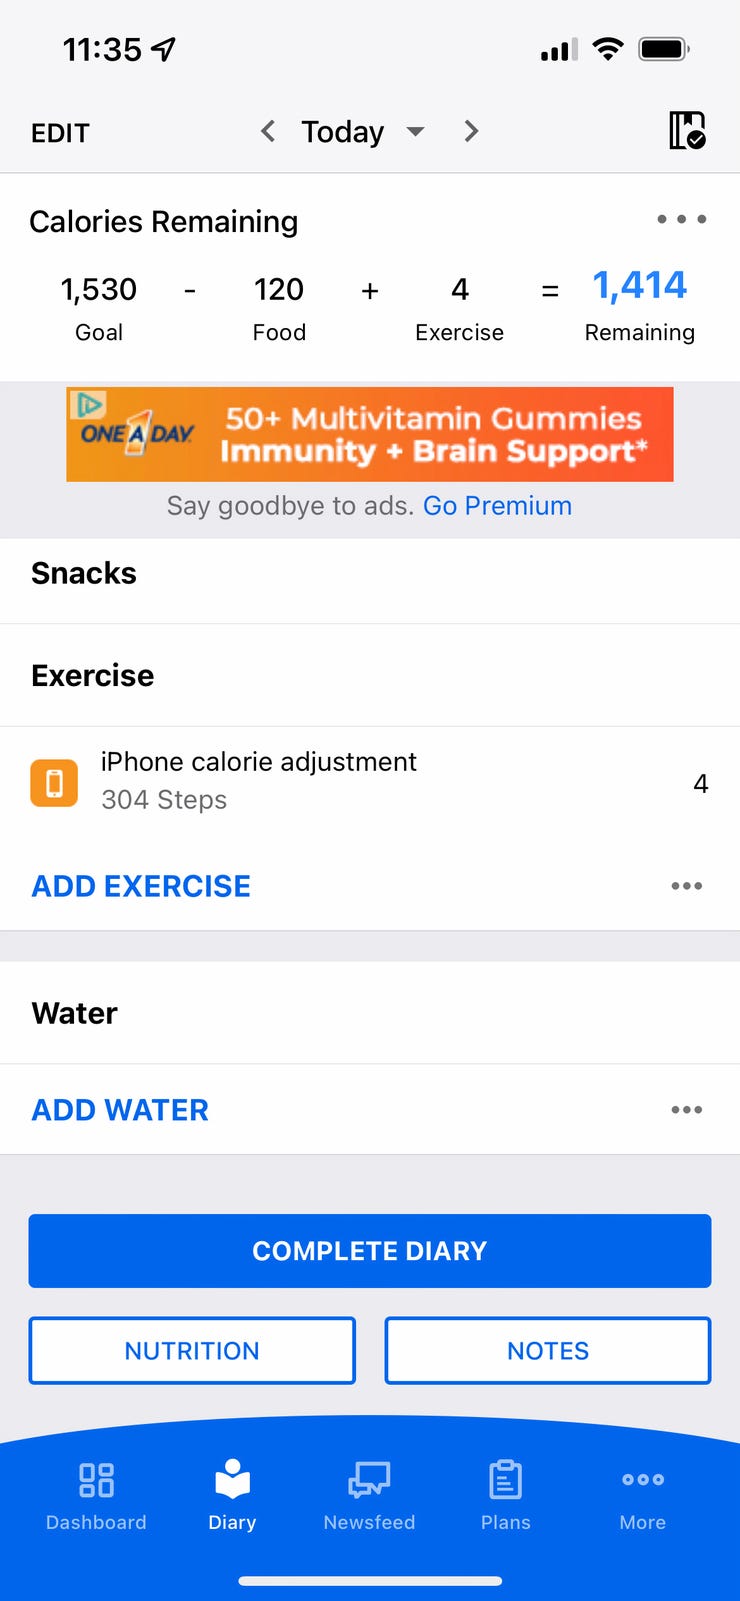 Guide on How to create workout app like My Fitness Pal and Earn